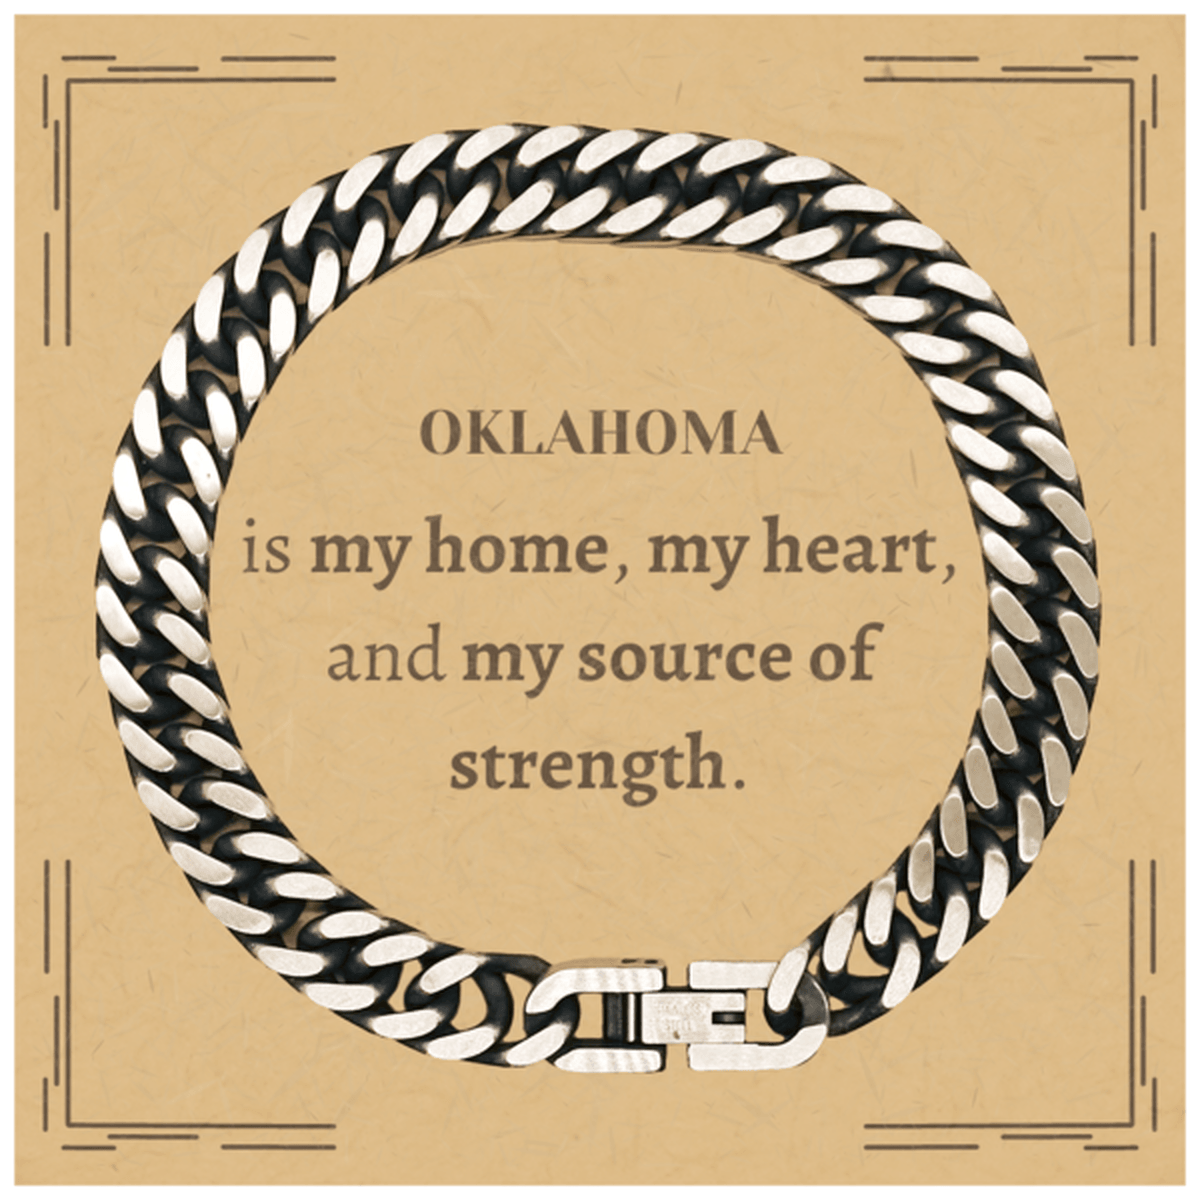 Oklahoma is my home Gifts, Lovely Oklahoma Birthday Christmas Cuban Link Chain Bracelet For People from Oklahoma, Men, Women, Friends - Mallard Moon Gift Shop